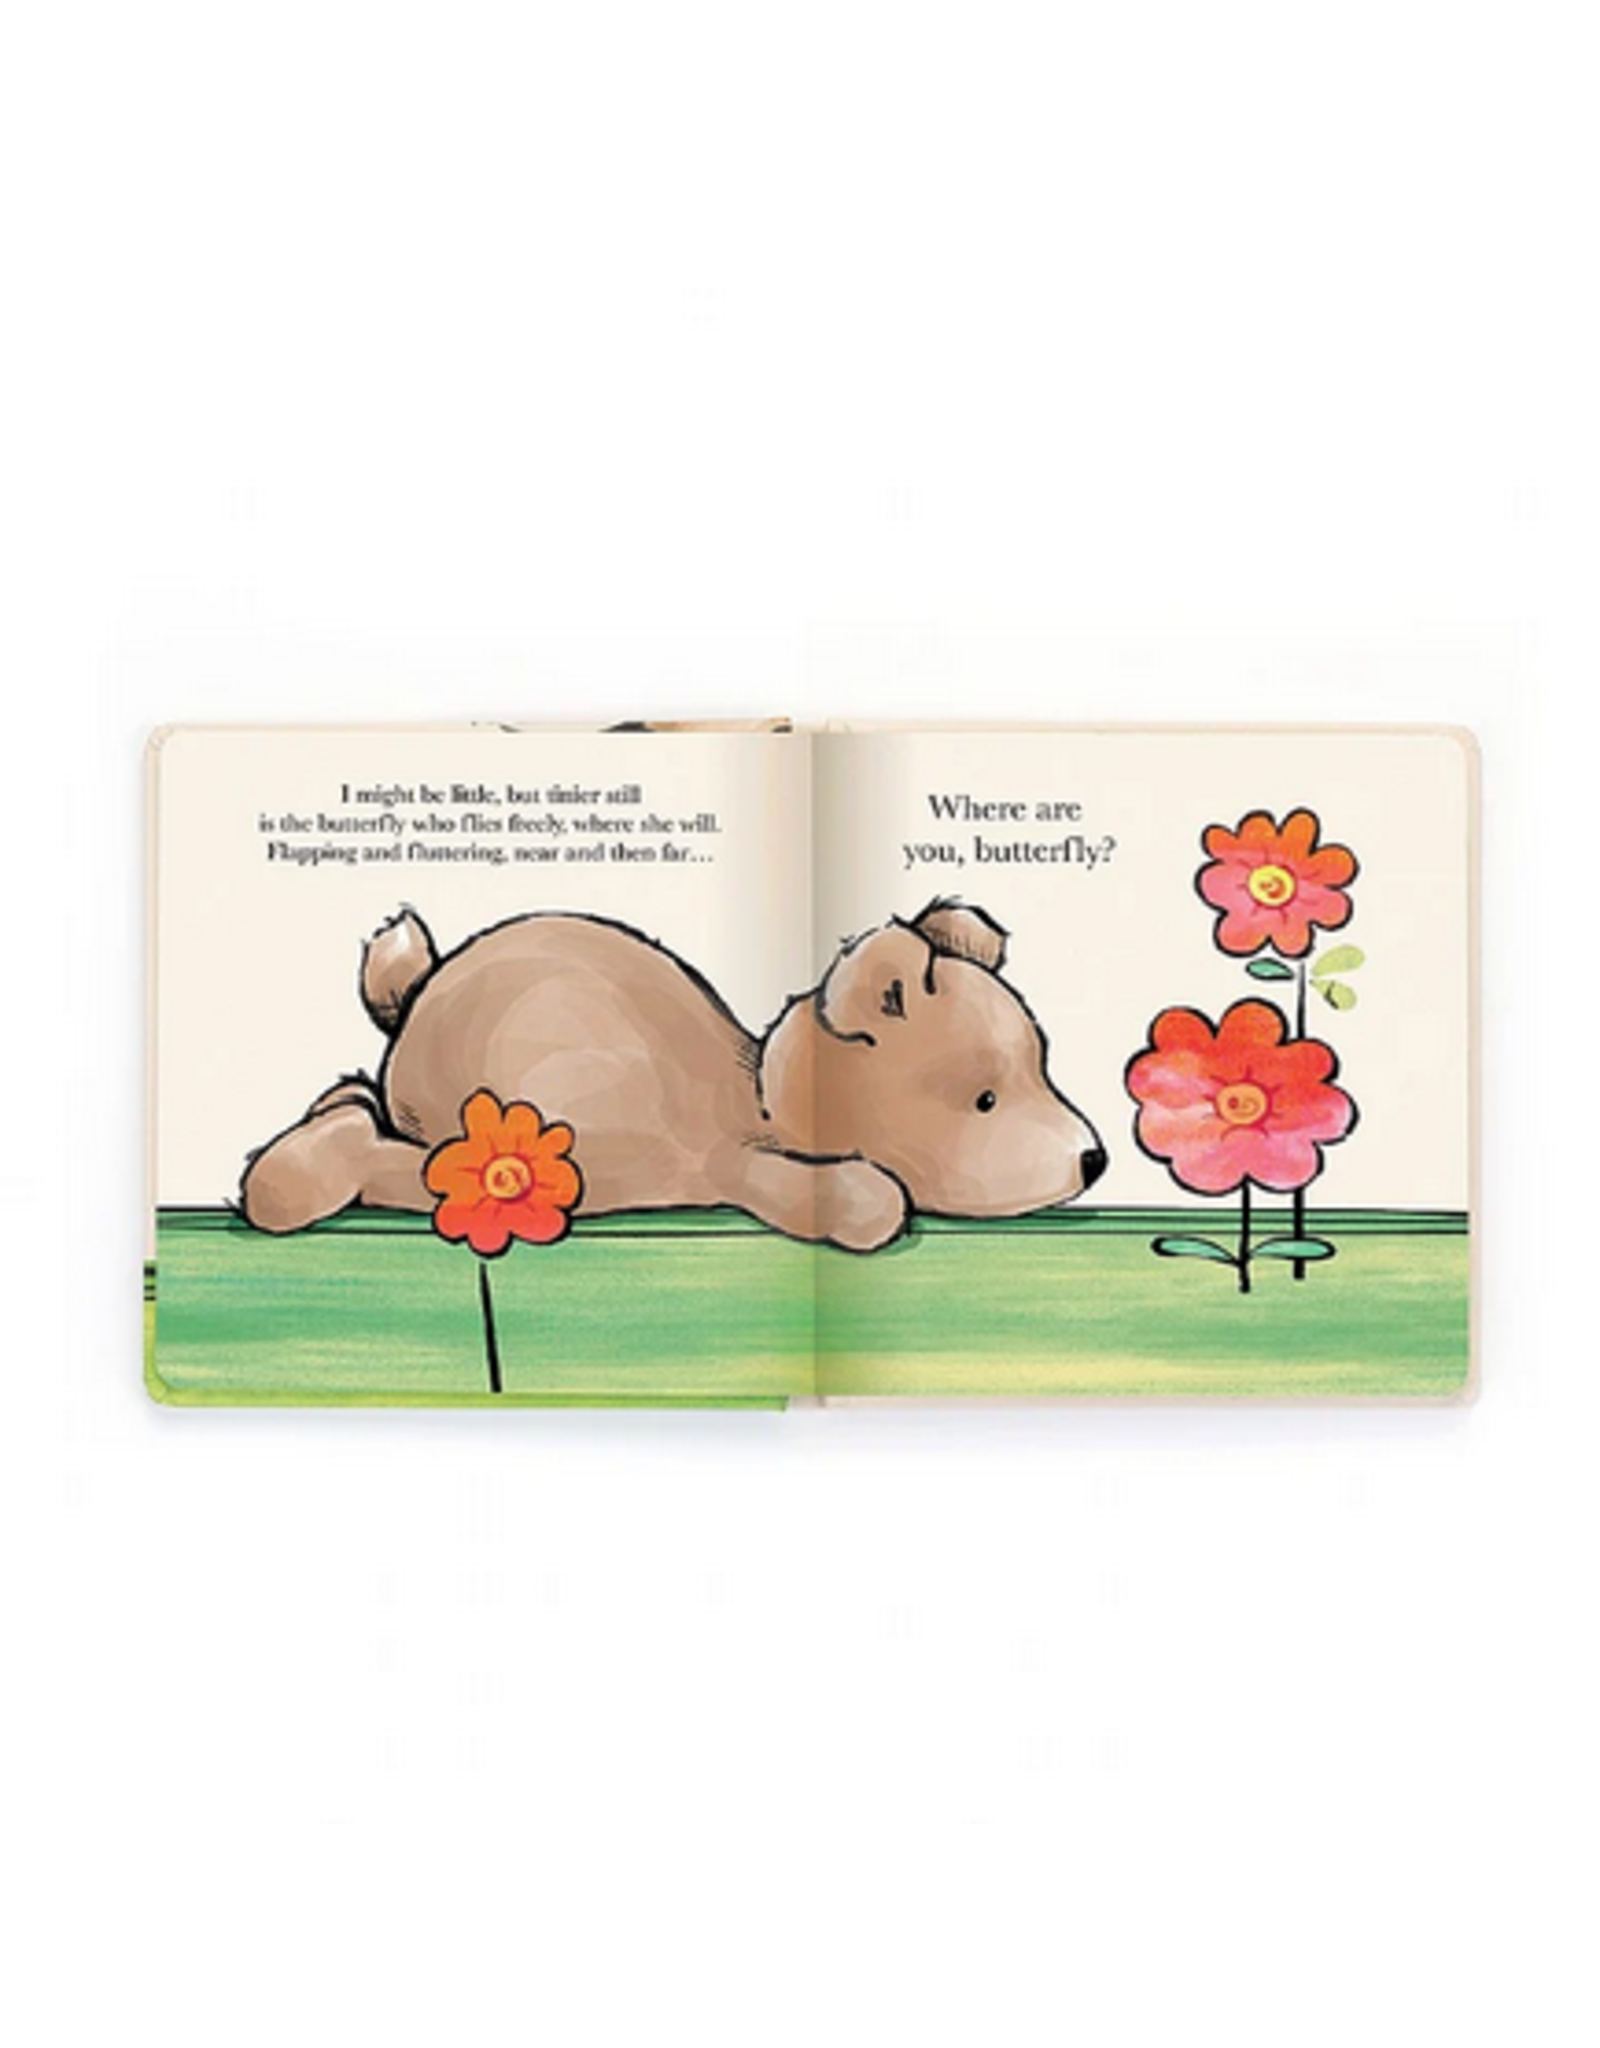 jellycat Jellycat I Might Be Little Book